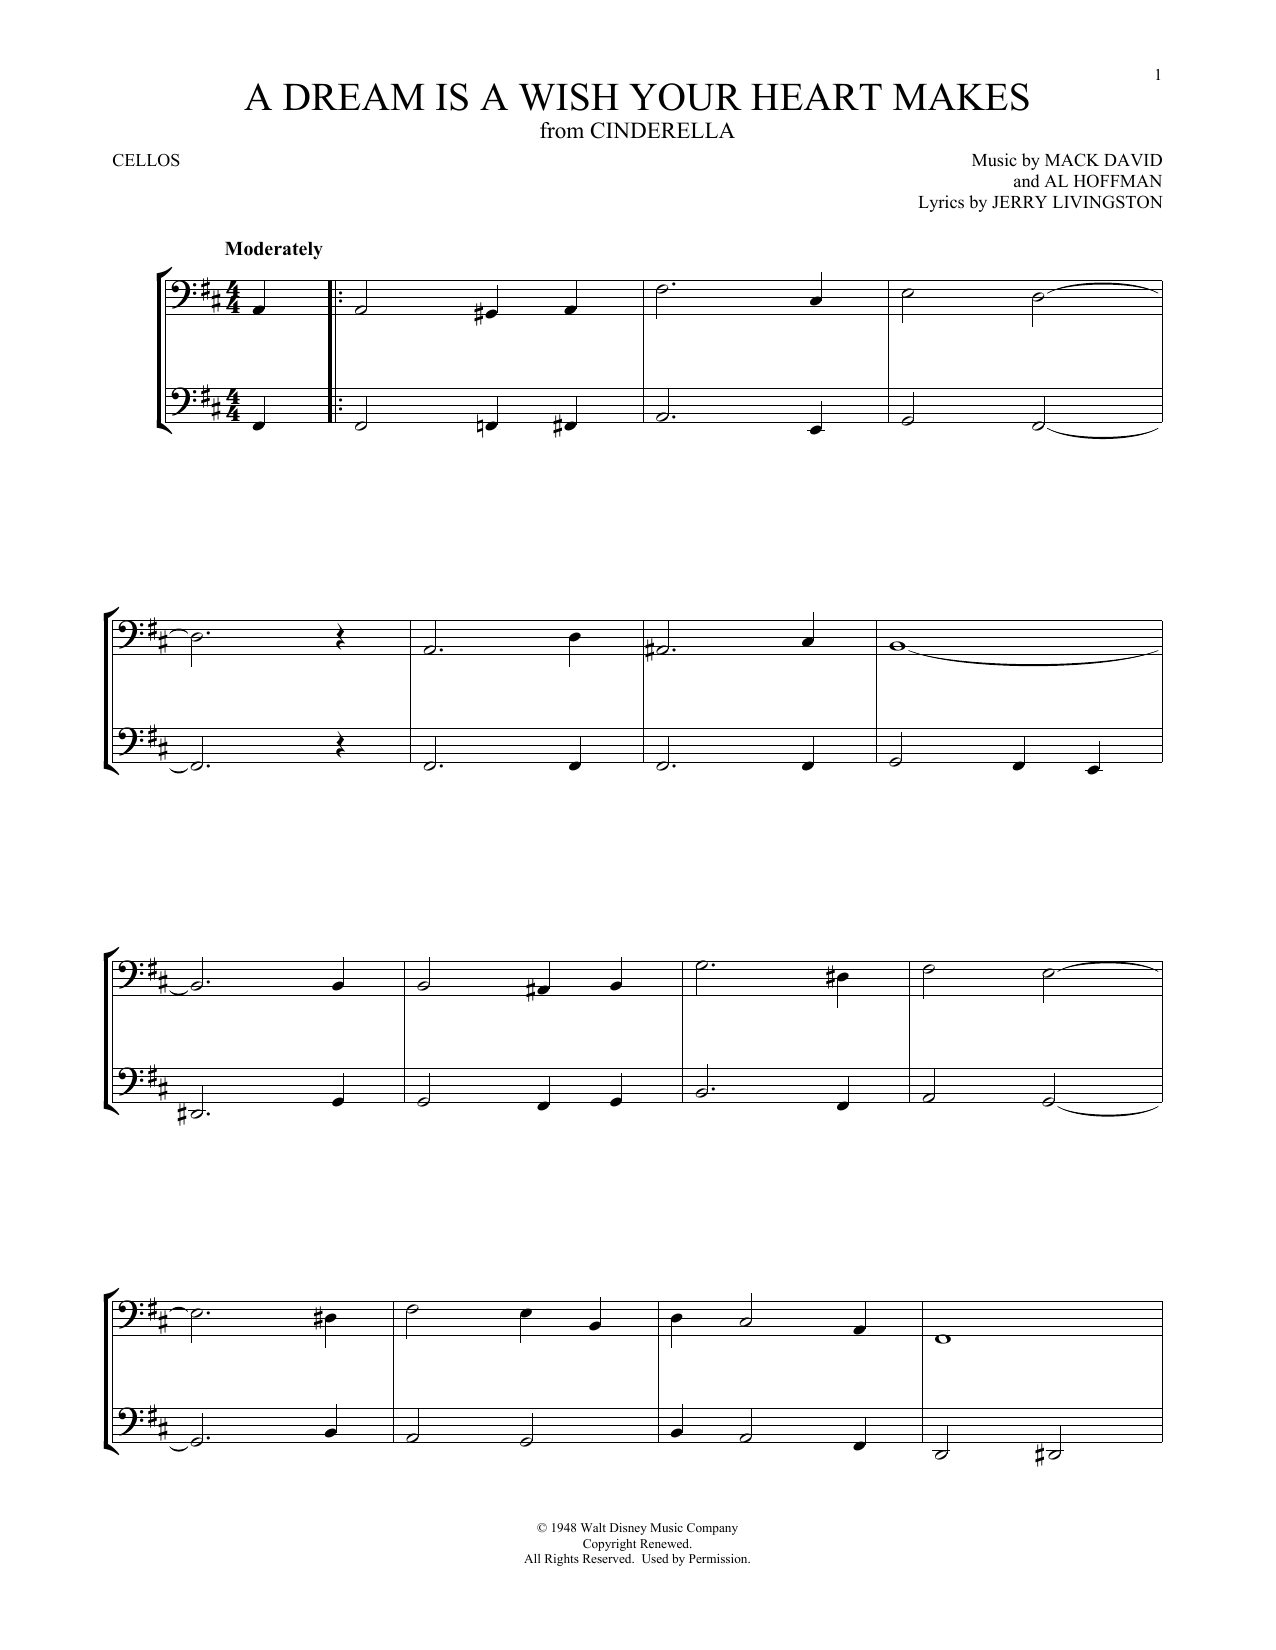 Download Linda Ronstadt A Dream Is A Wish Your Heart Makes (fro Sheet Music